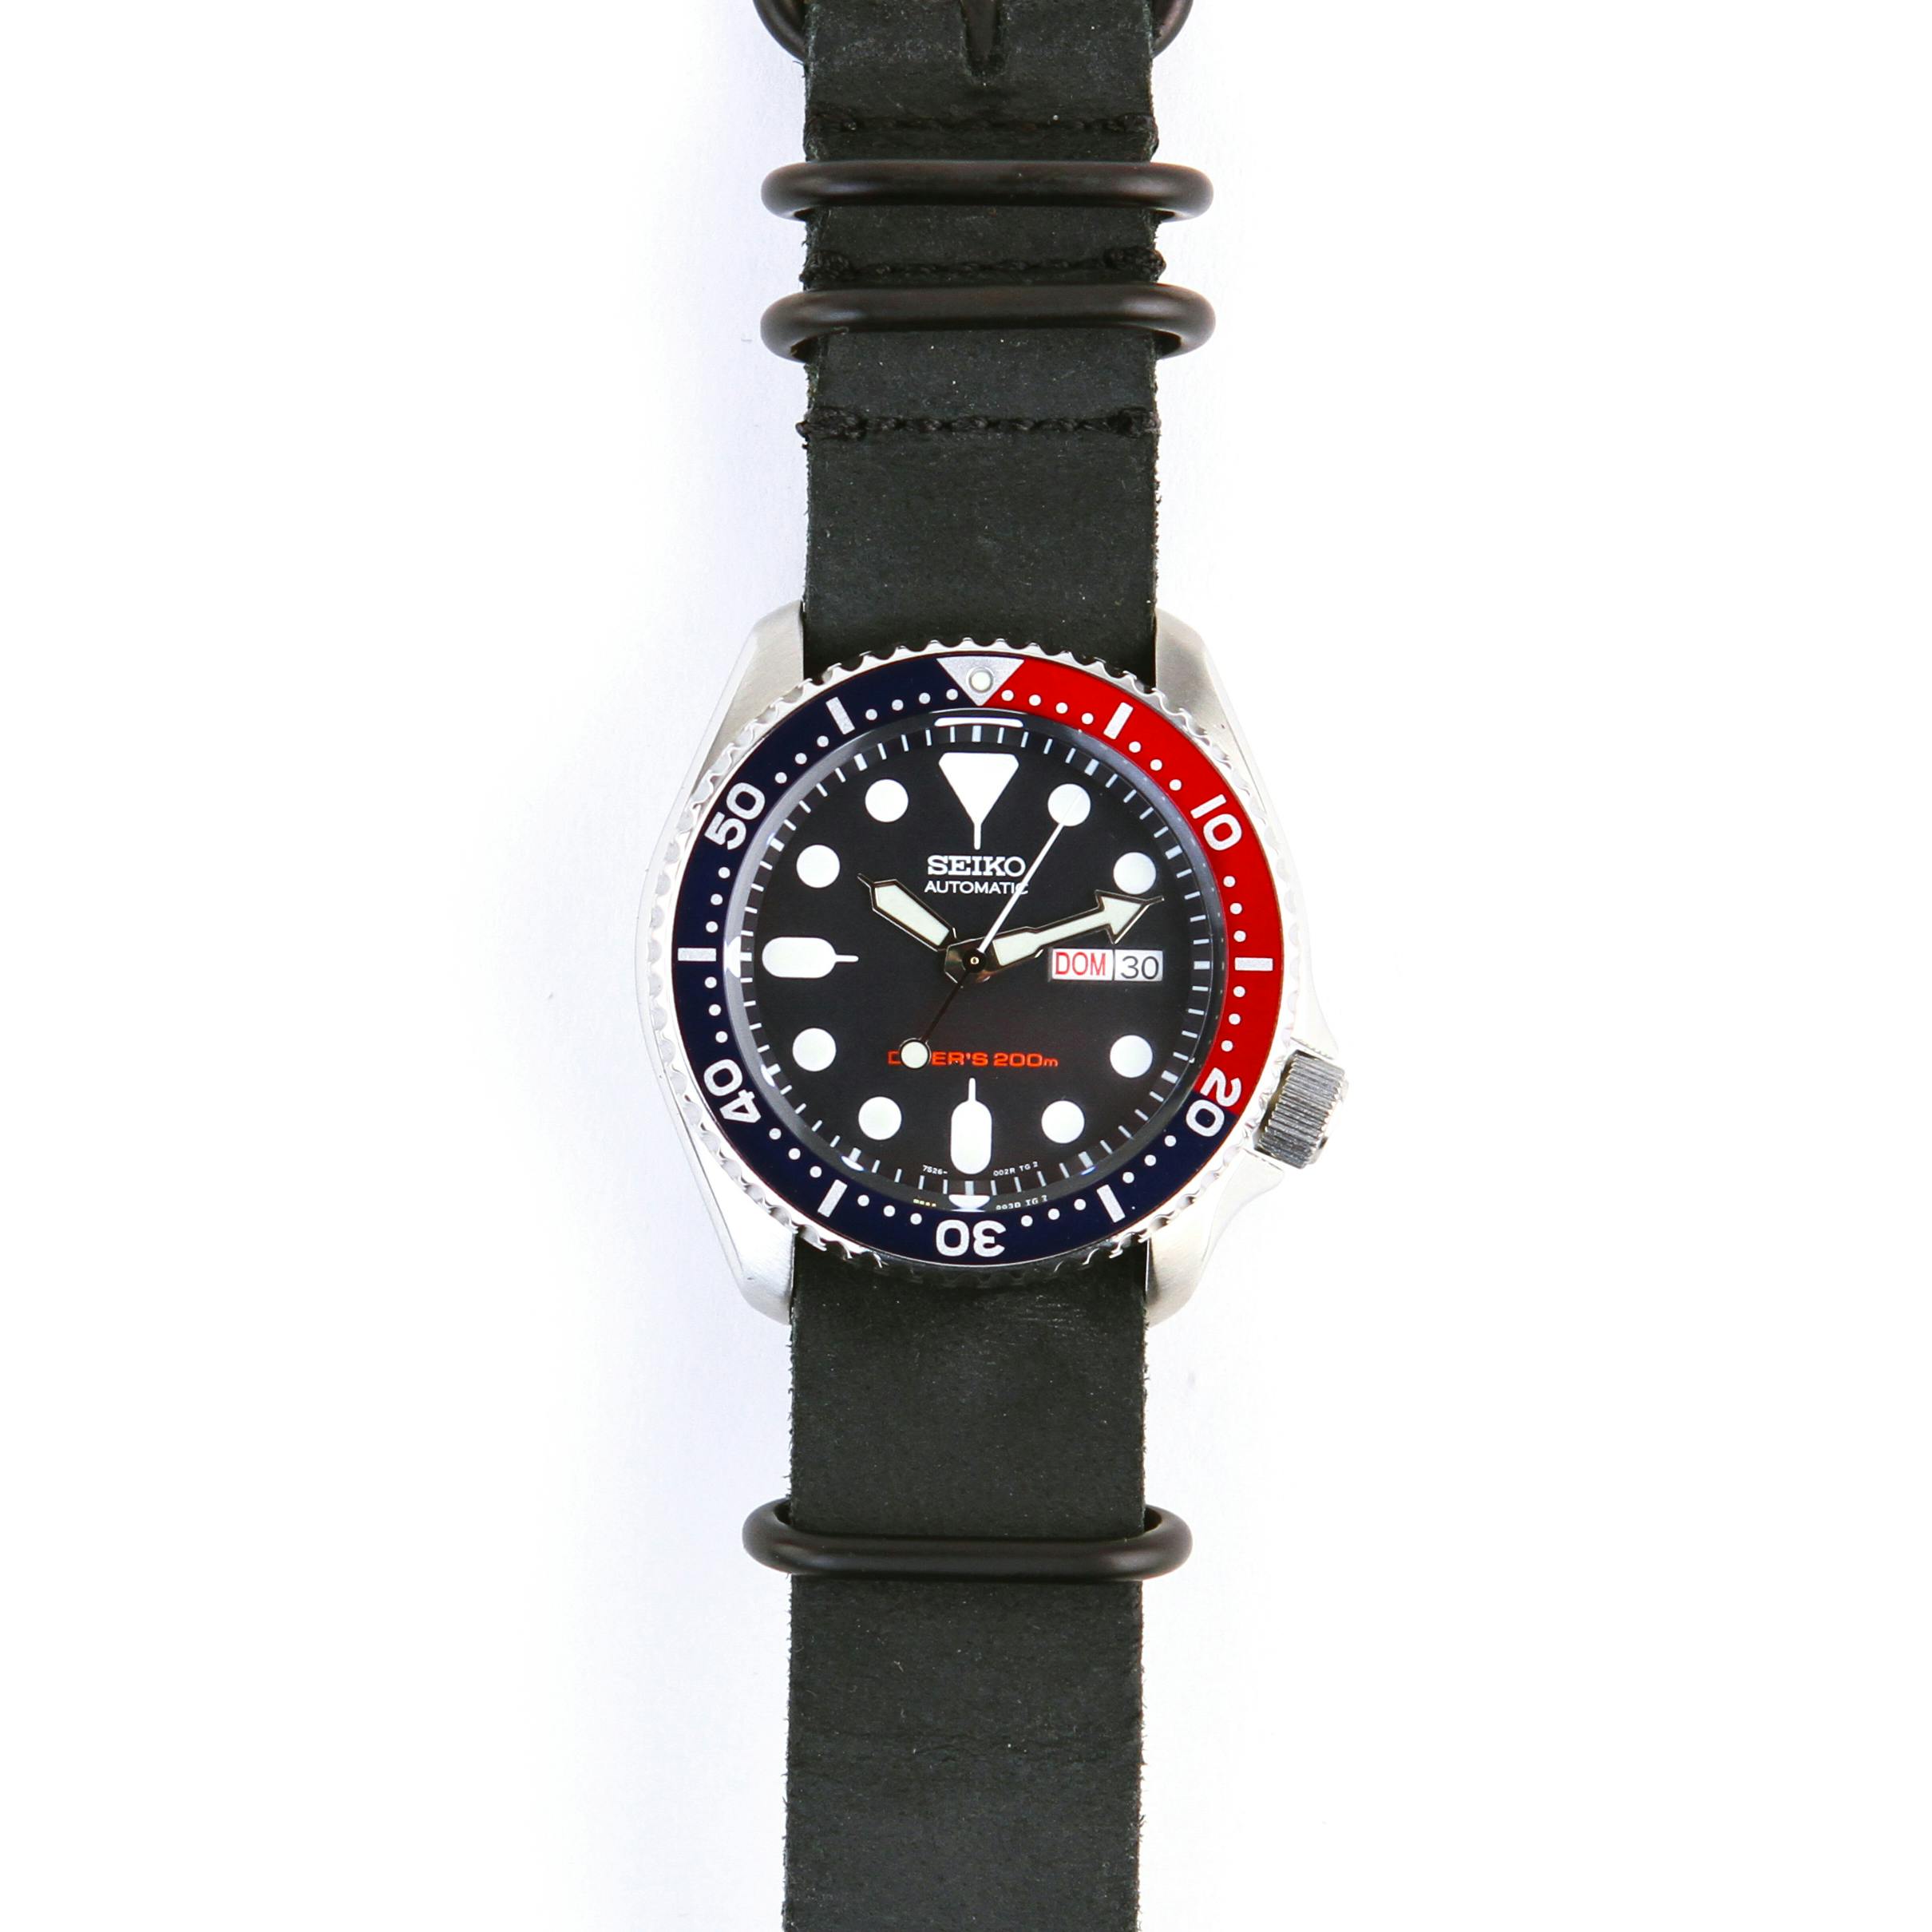 Huckberry Seiko Dive Watch - Red/ Blue Face w/ Coal Band | Watches |  Huckberry